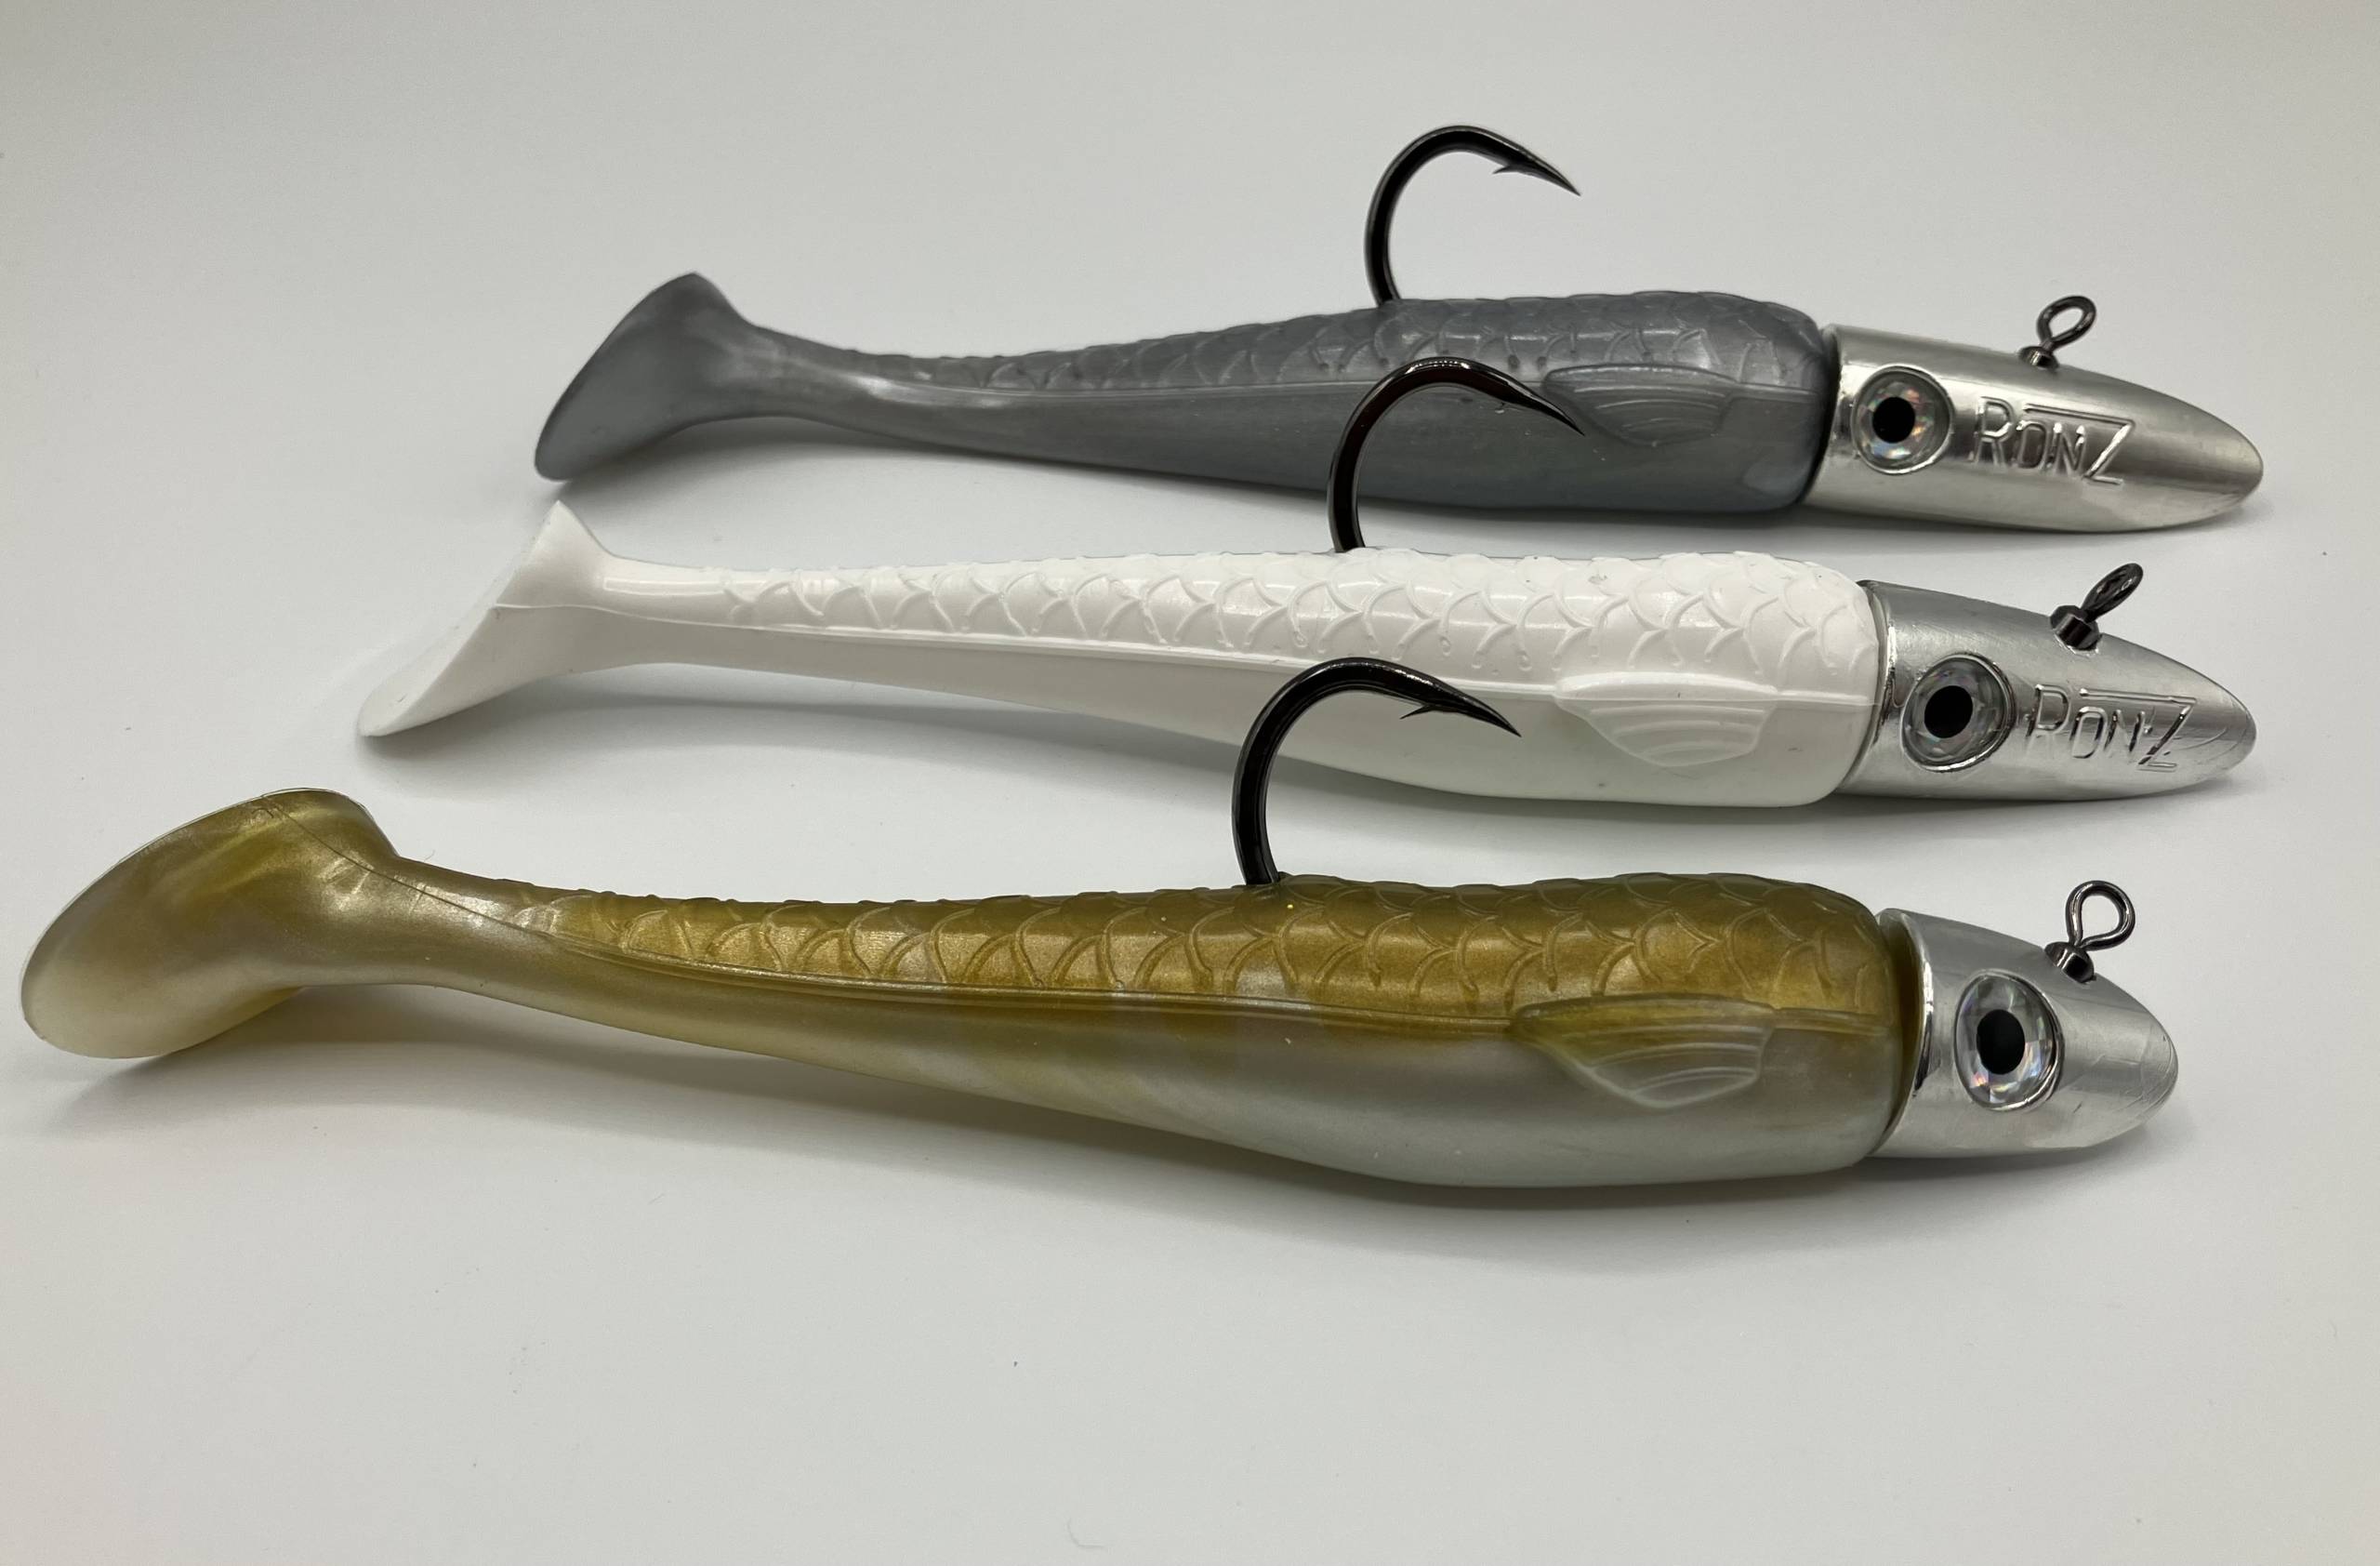 Z-fin Big Game Series - RonZ Lures